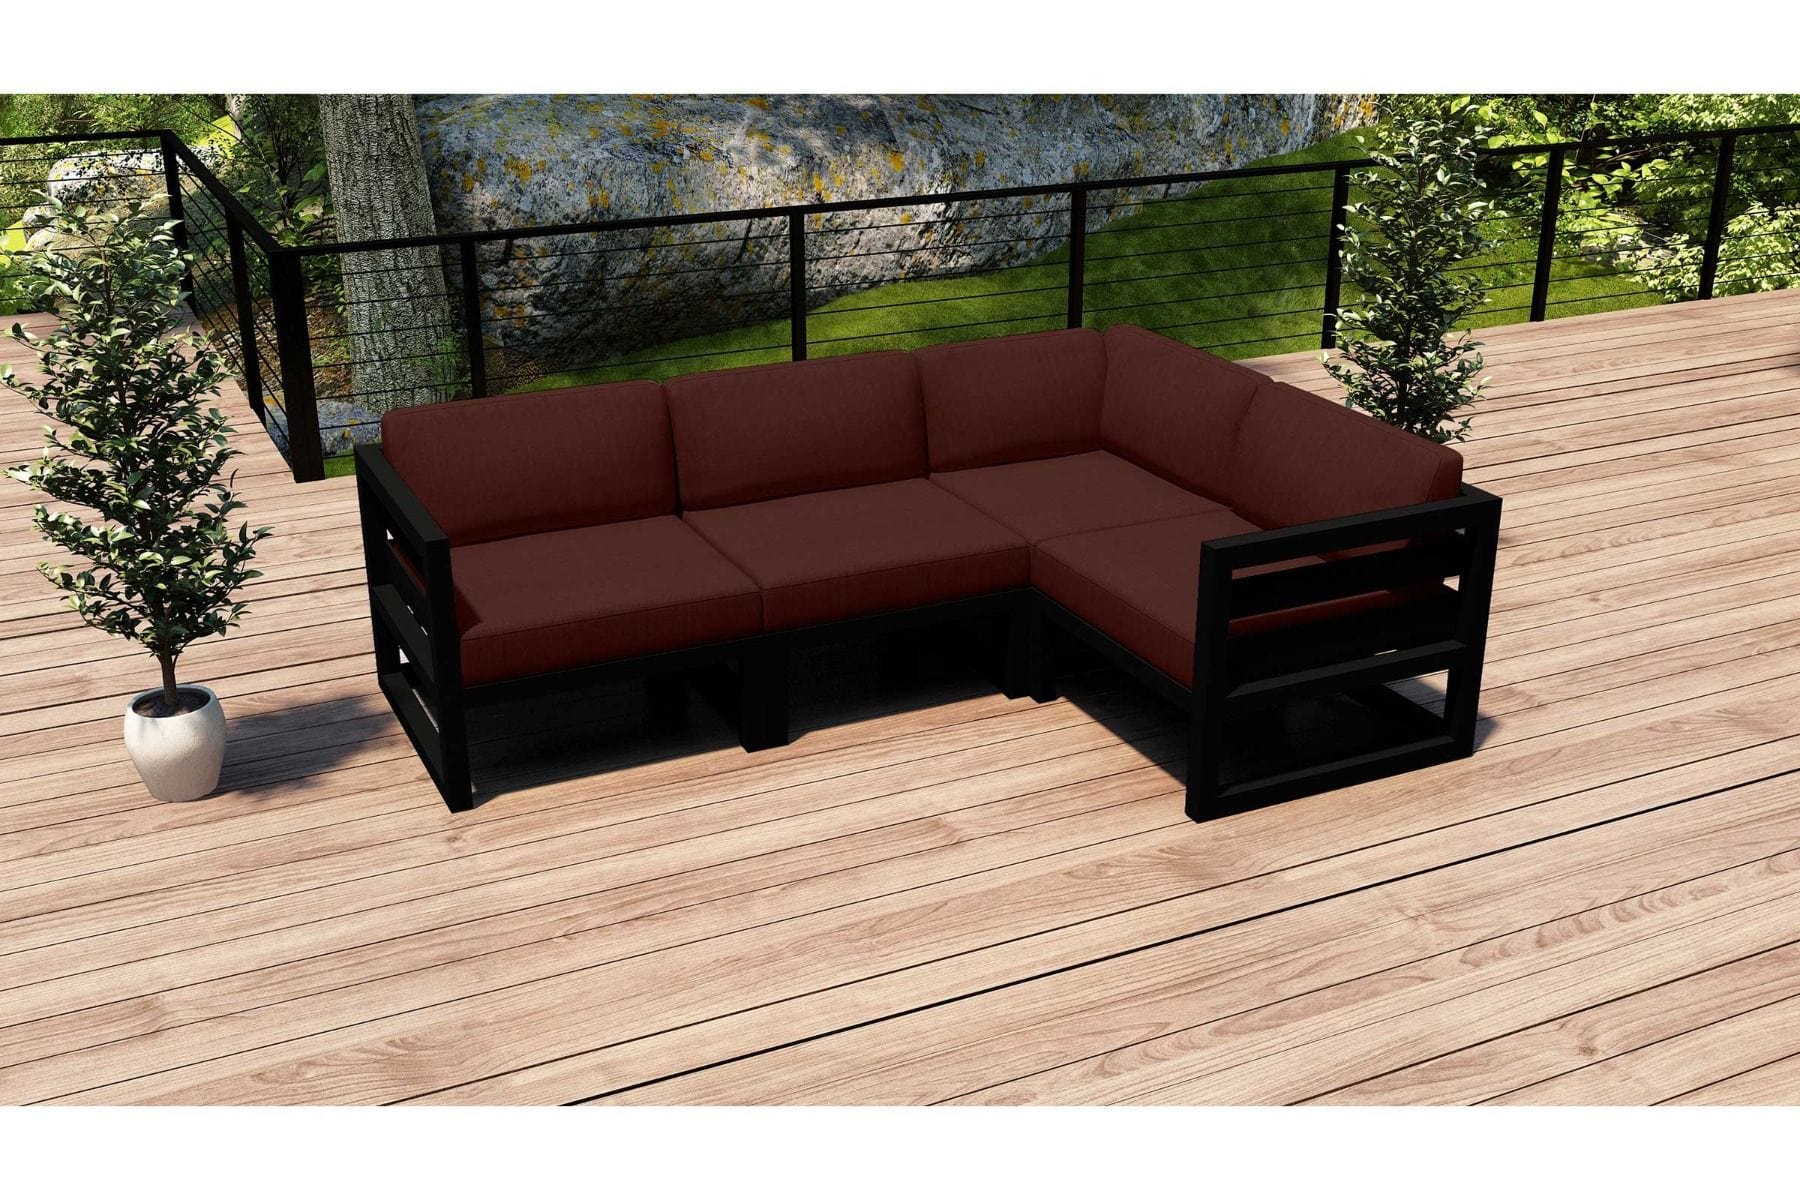 Harmonia Living Outdoor Sectional Canvas Henna (HN) Harmonia Living - Avion 4 Piece Sectional Set | Corner, Middle, Left and Right | HL-AVN-BK-4SEC